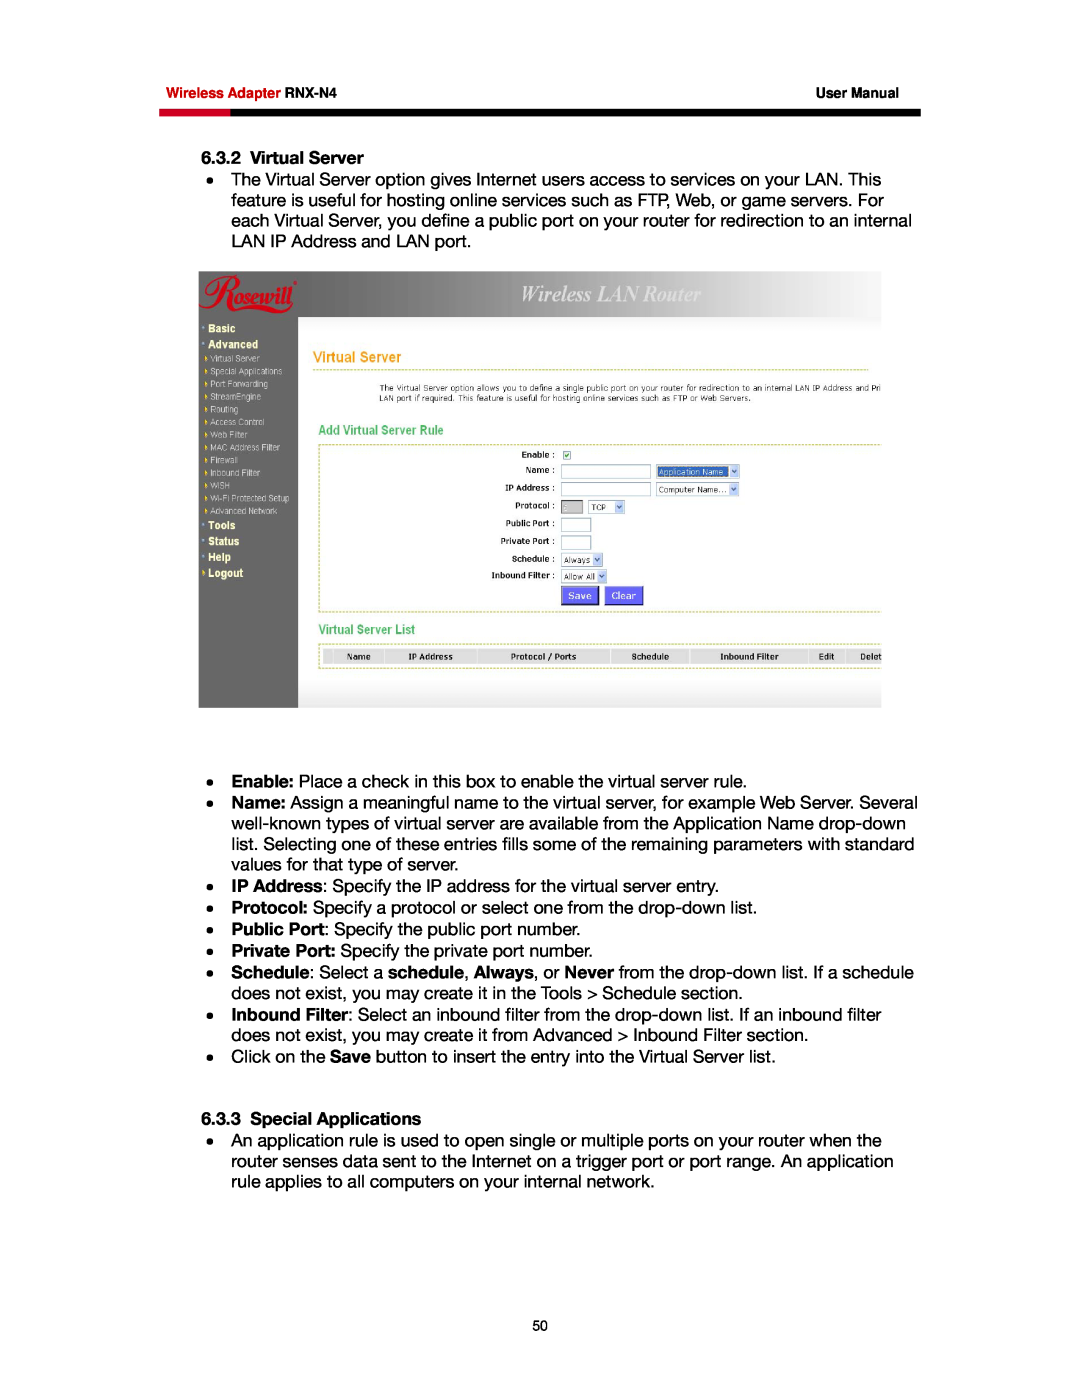 Rosewill RNX-N4 user manual Virtual Server, Special Applications 